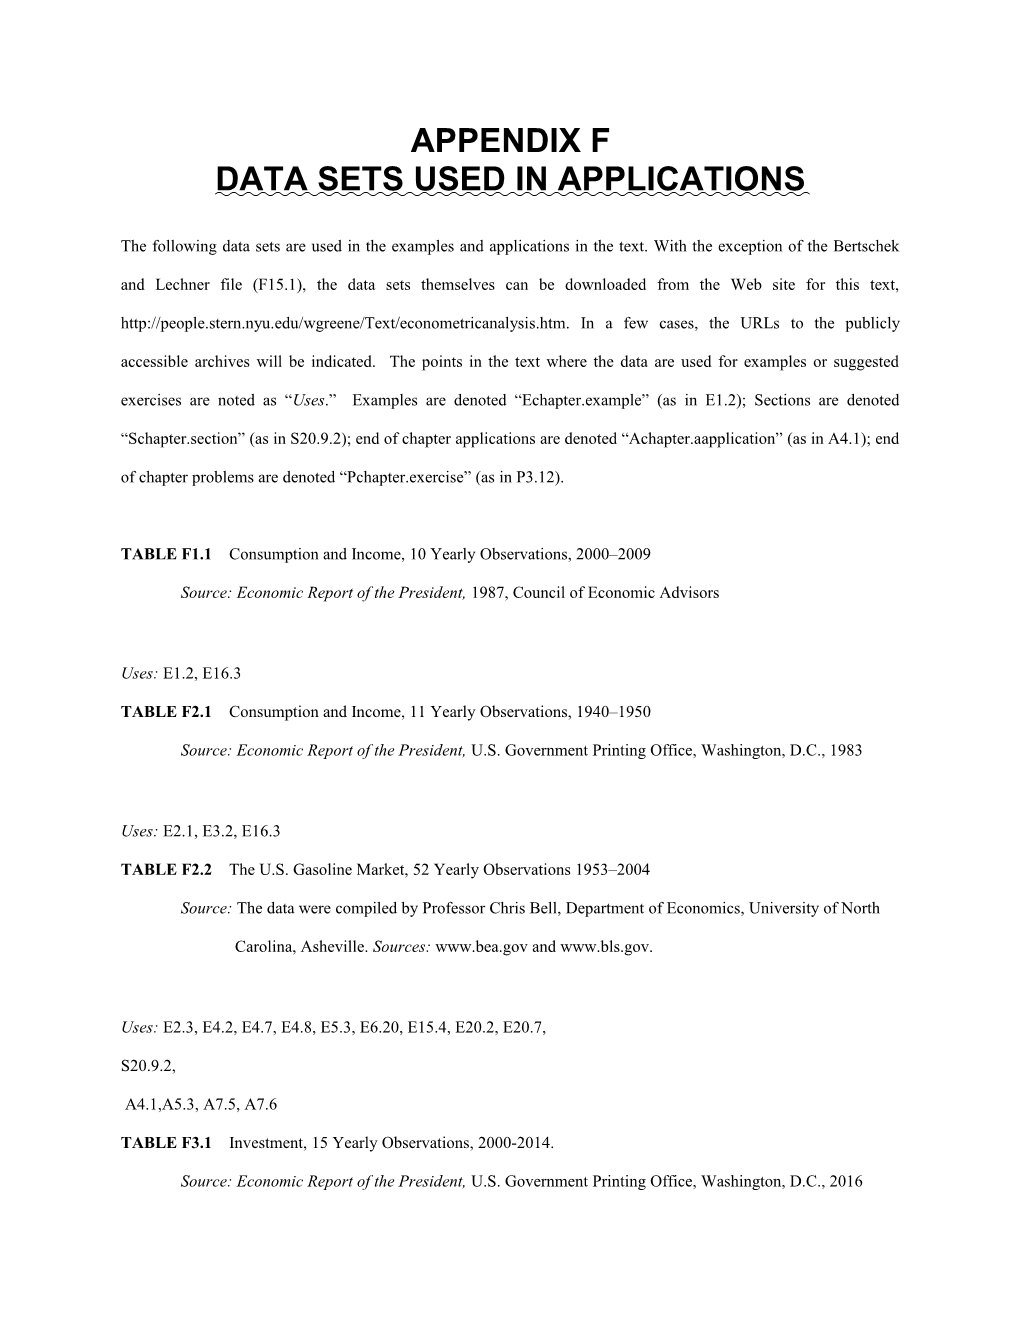 Data Sets Used in Applications